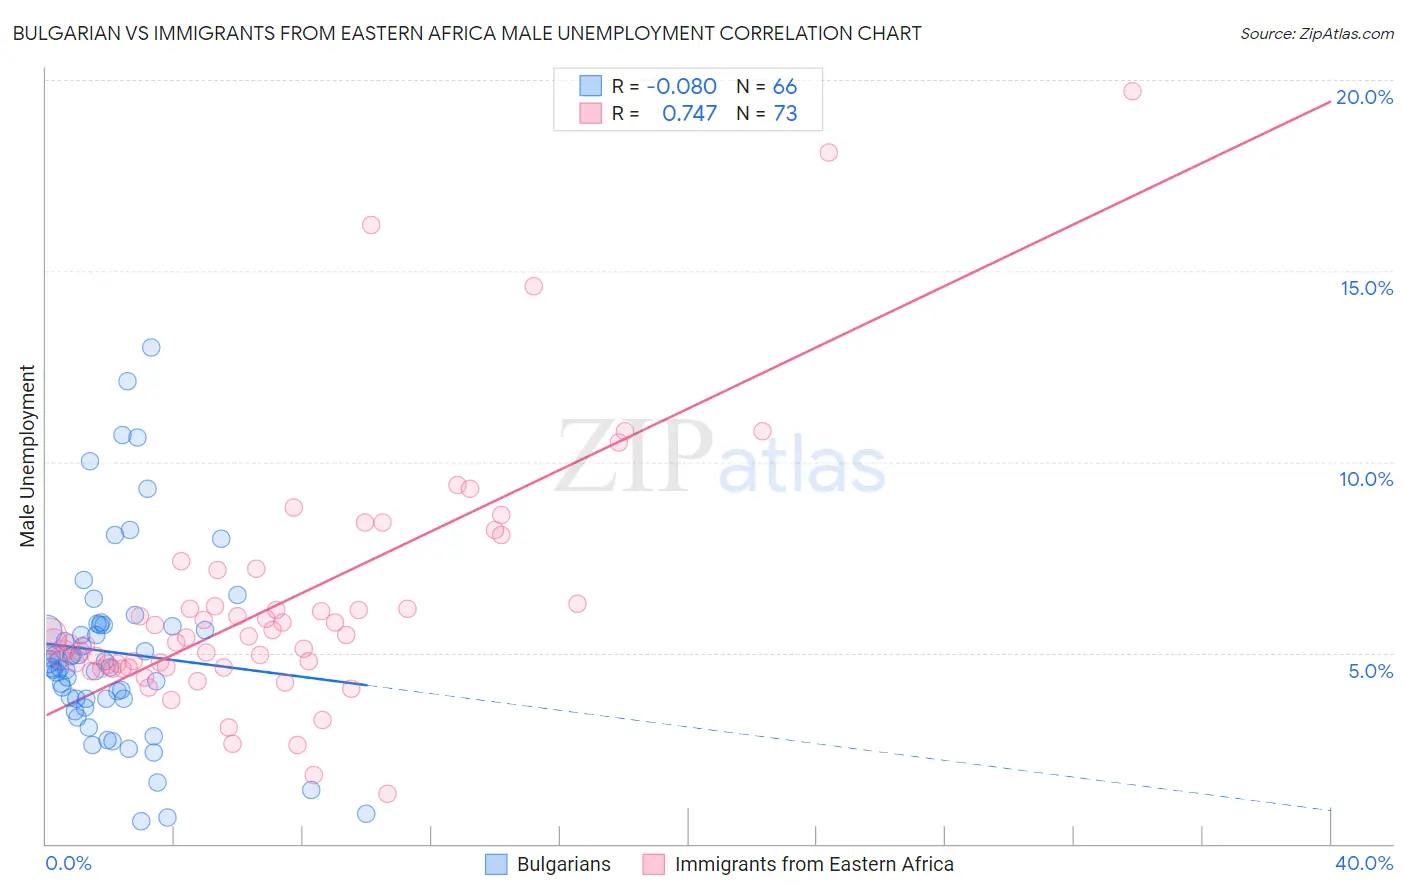 Bulgarian vs Immigrants from Eastern Africa Male Unemployment